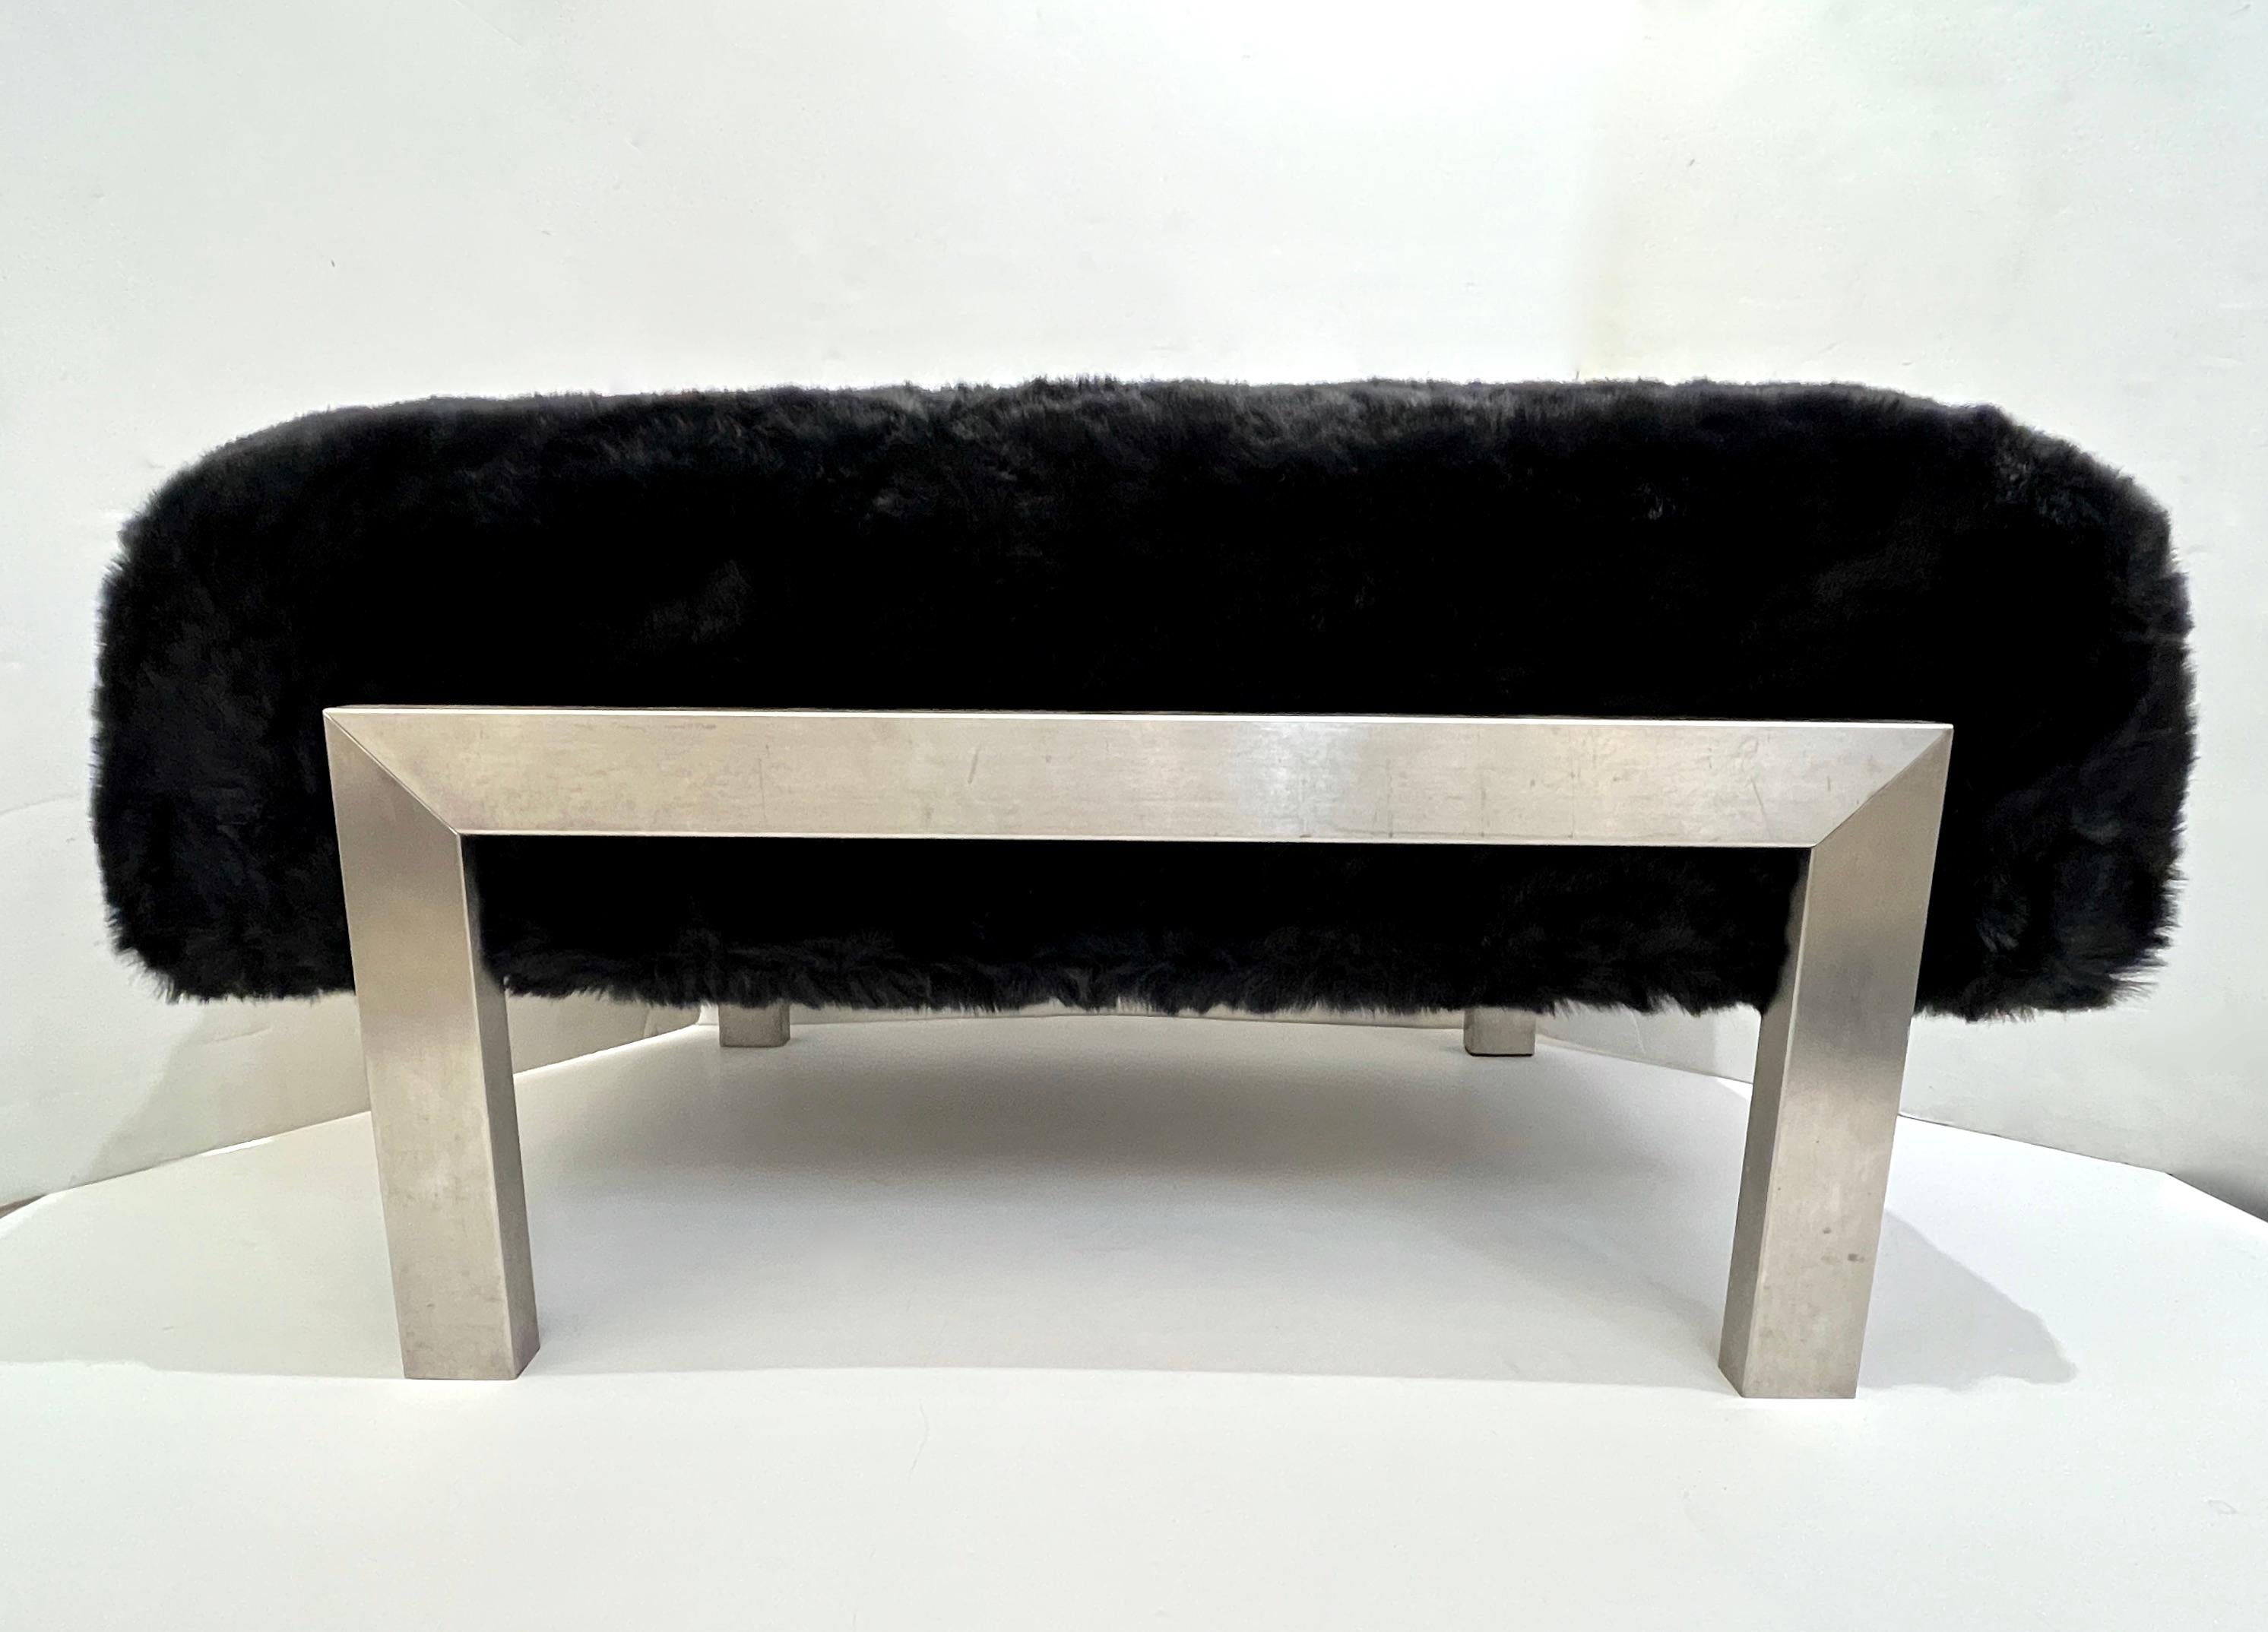 Brushed 1970s Italian Vintage Black Faux Fur Steel Bed Stool Bench - 1 Pair available For Sale